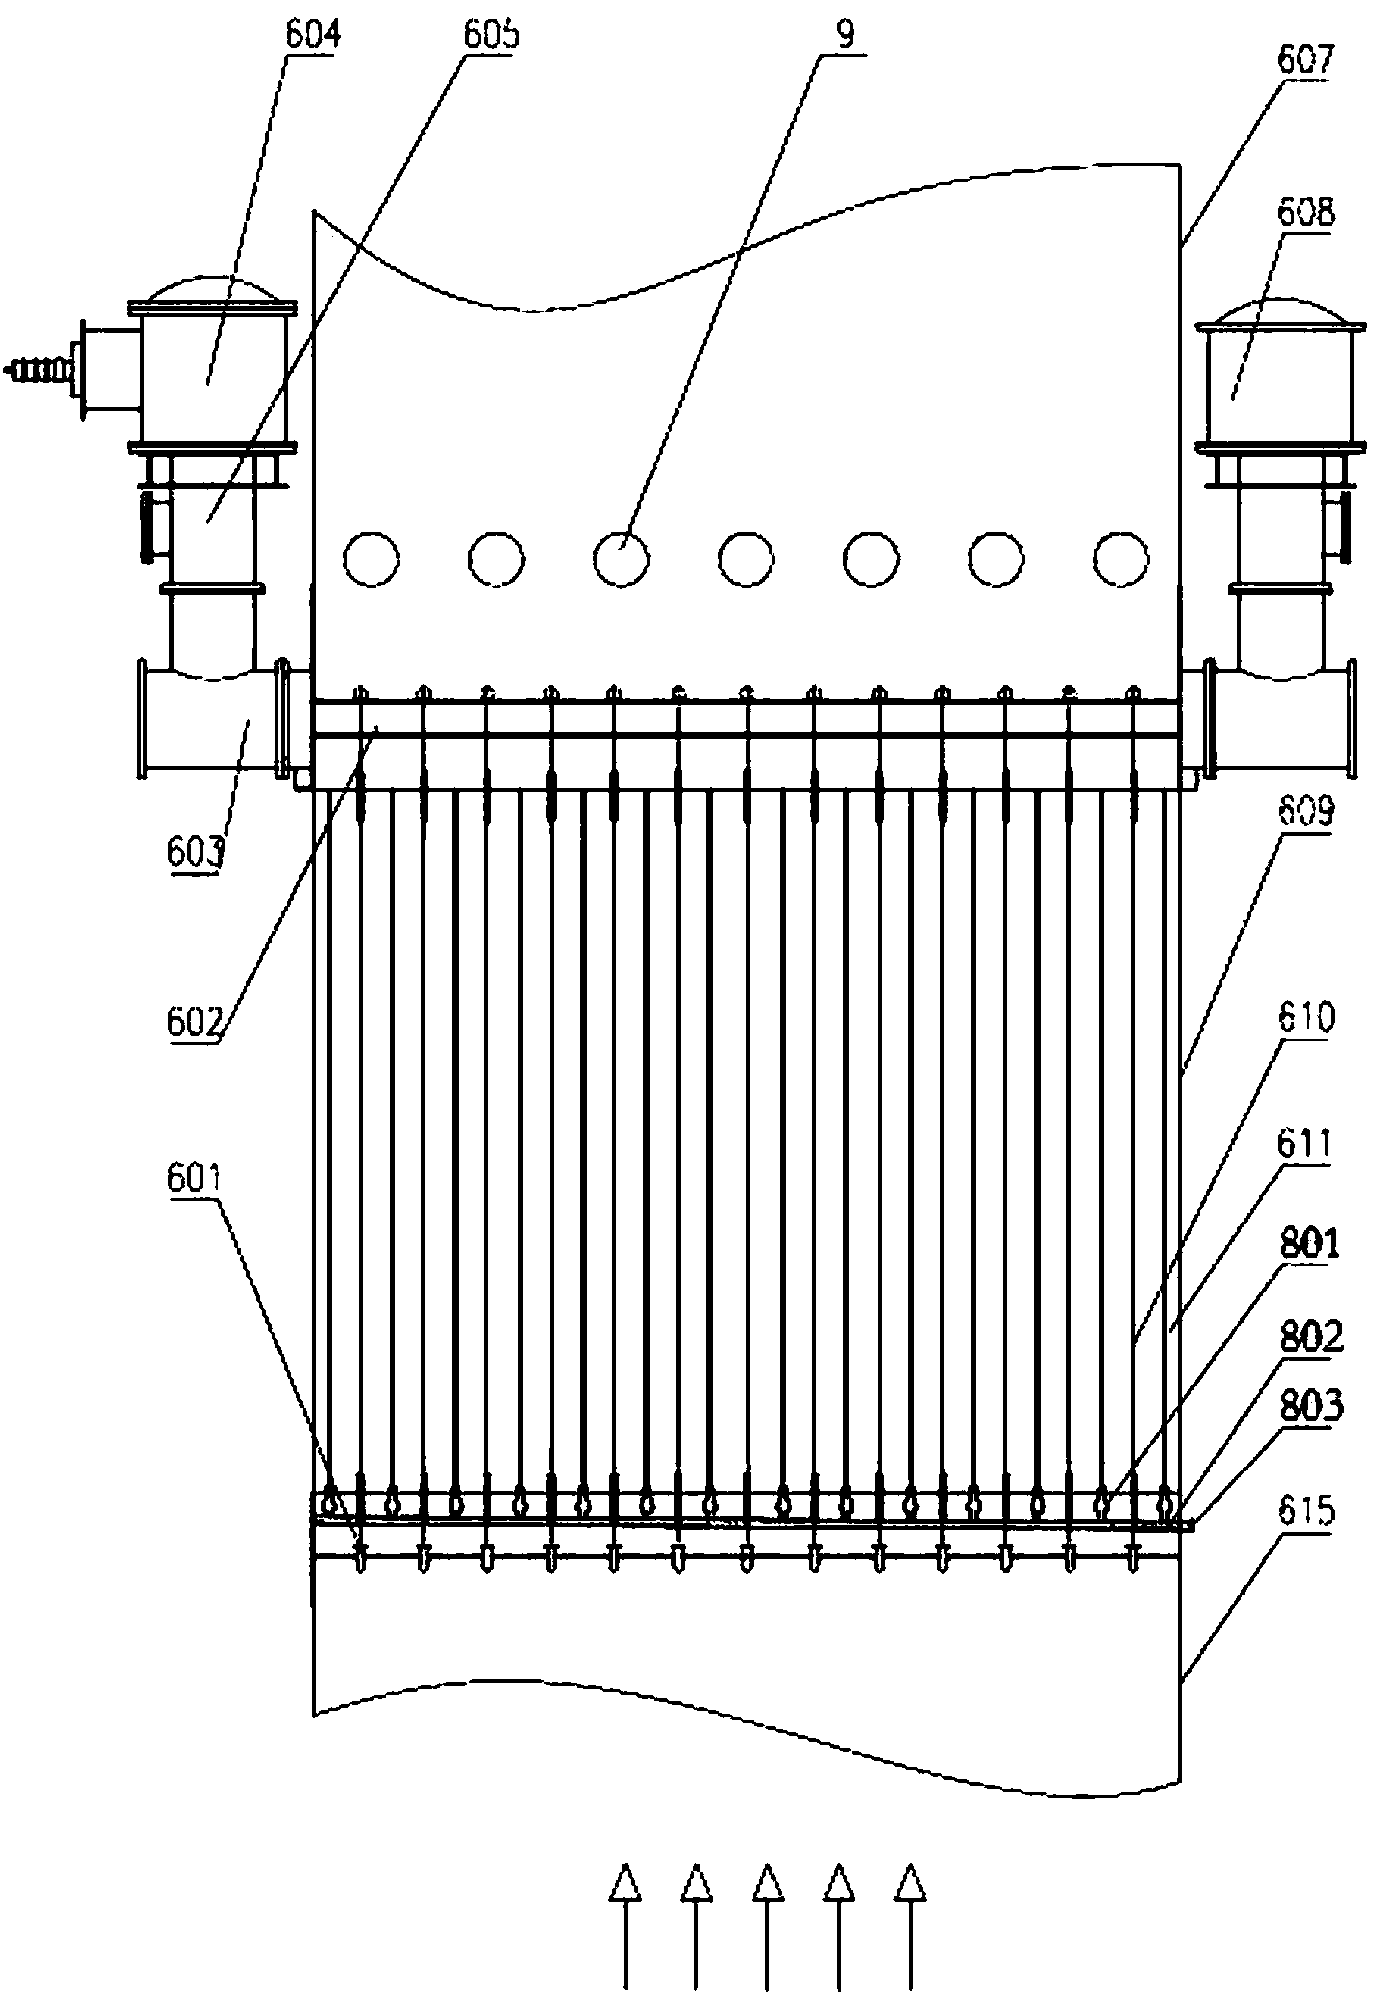 Absorption tower with wet type electric demister